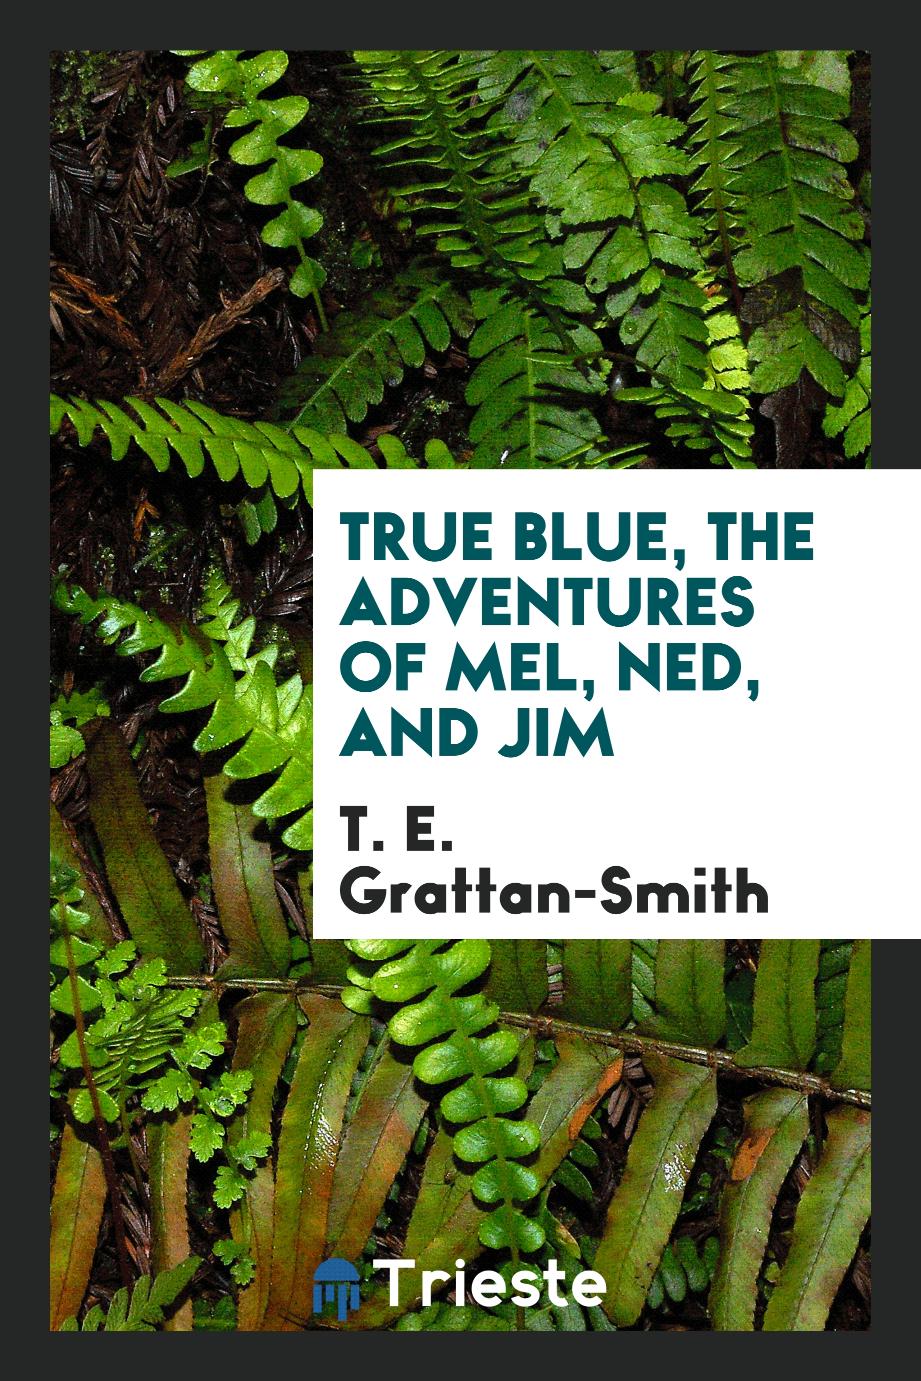 True blue, the adventures of Mel, Ned, and Jim